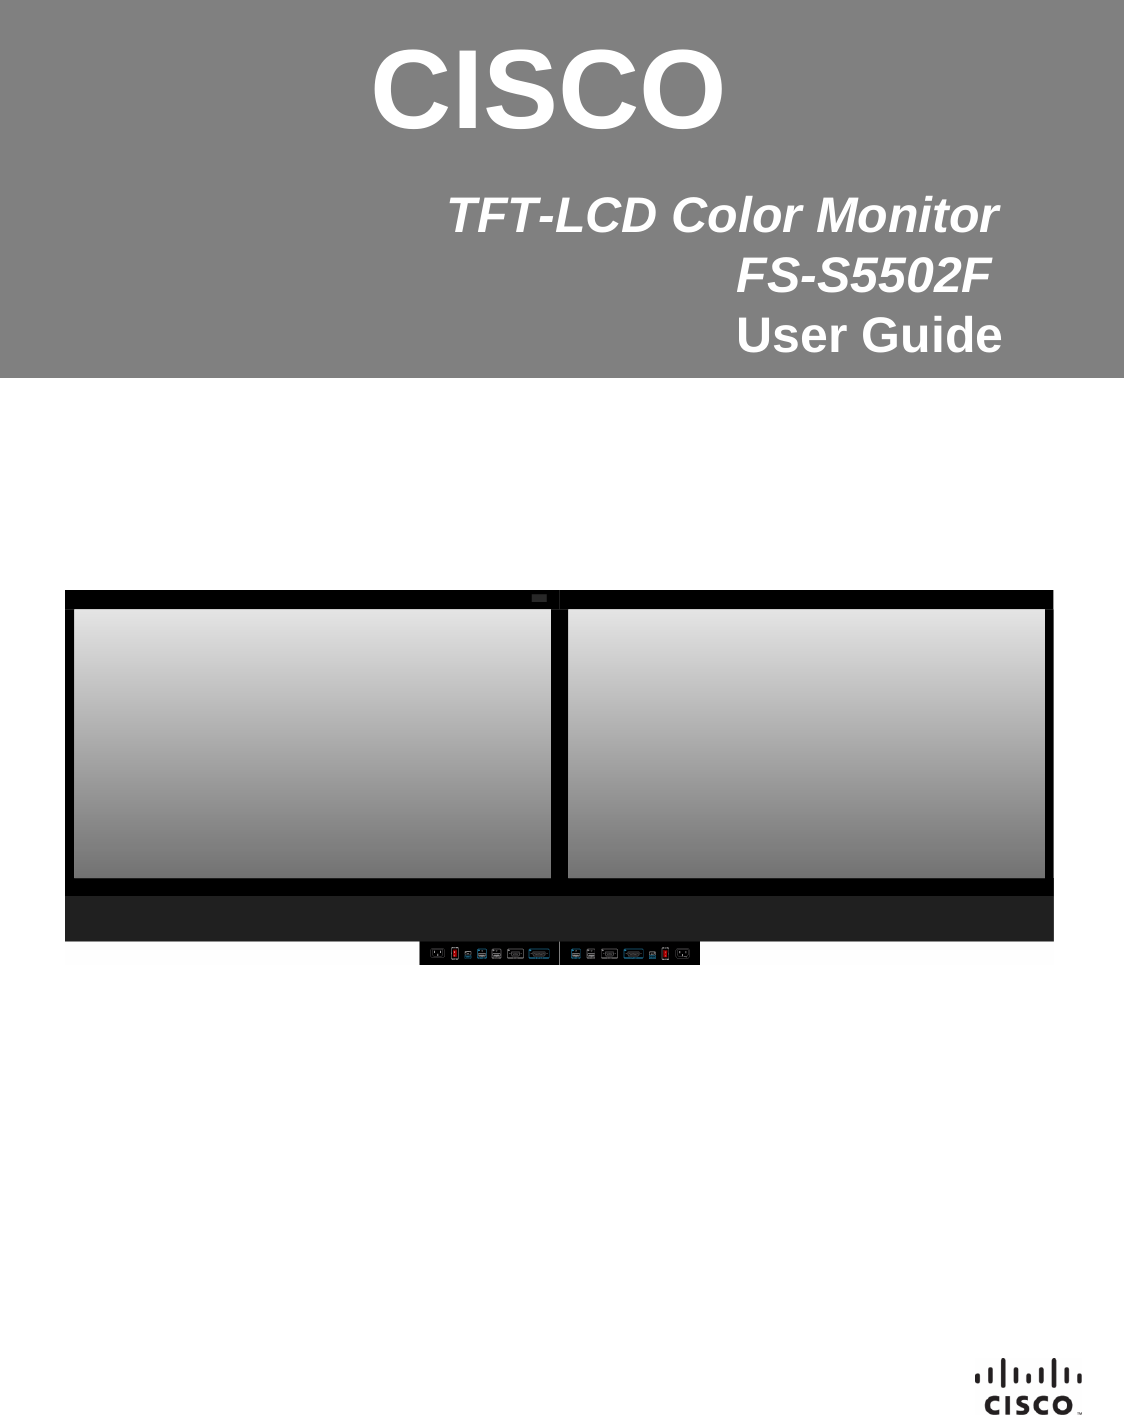 General Specification TFT-LCD Color MonitorFS-S5502FUser GuideCISCO